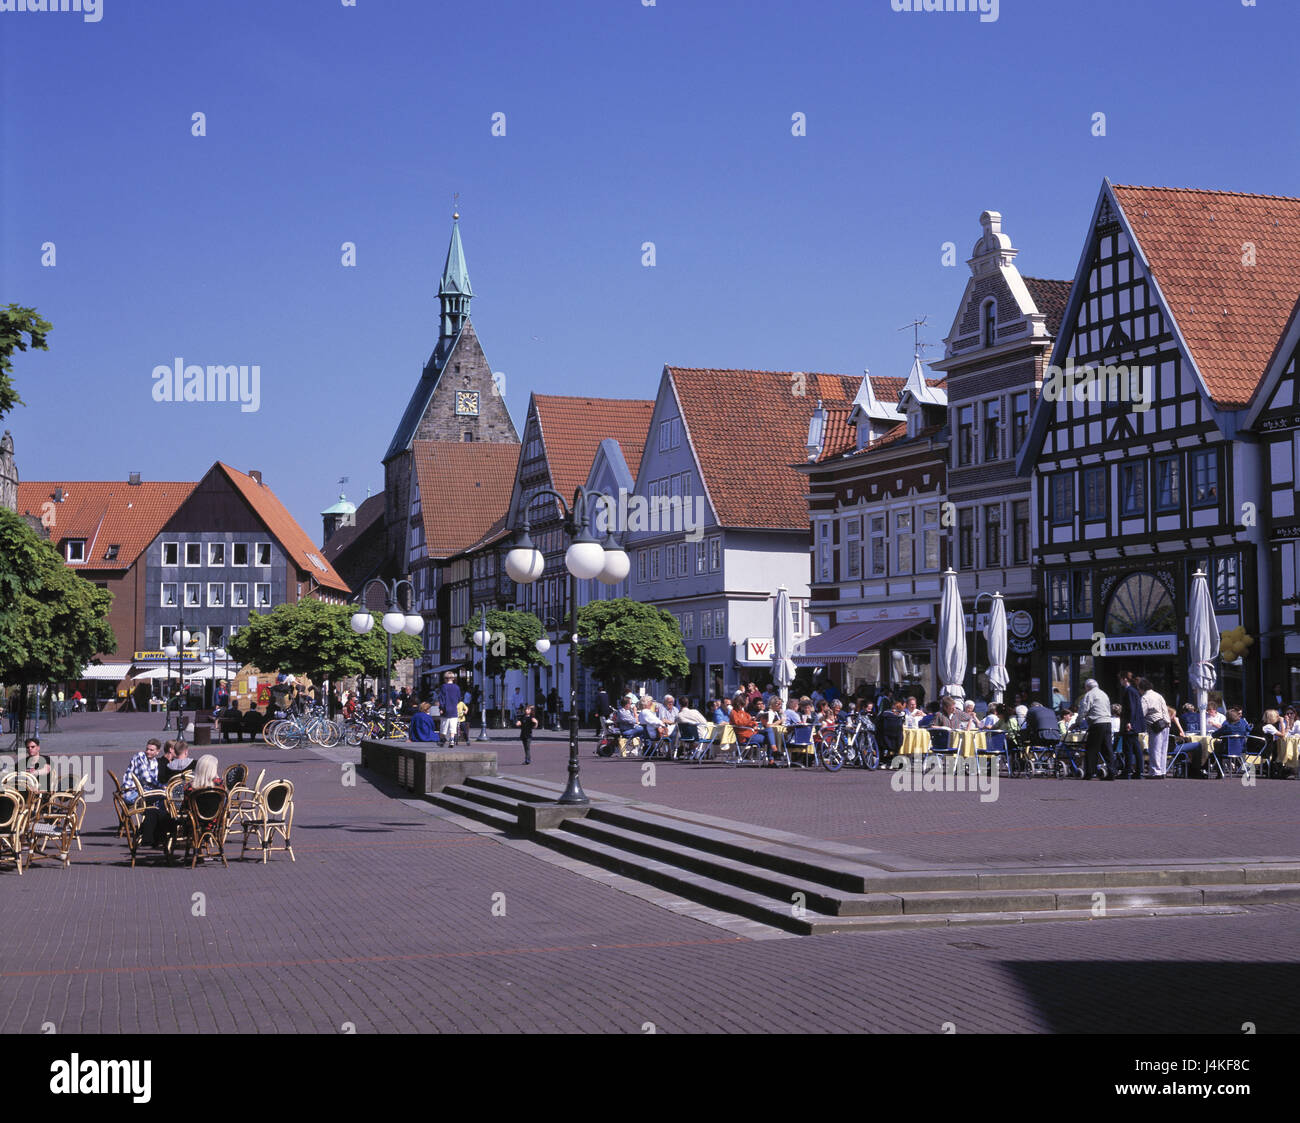 Germany, Lower Saxony, Bückeburger Börde, Stadthagen, St. of Martini church Europe, town view, Old Town, marketplace, to churchyard, parish church, hall church, structure, culture, houses, half-timbered houses, architectural style, half-timbered, tradition, place of interest Stock Photo